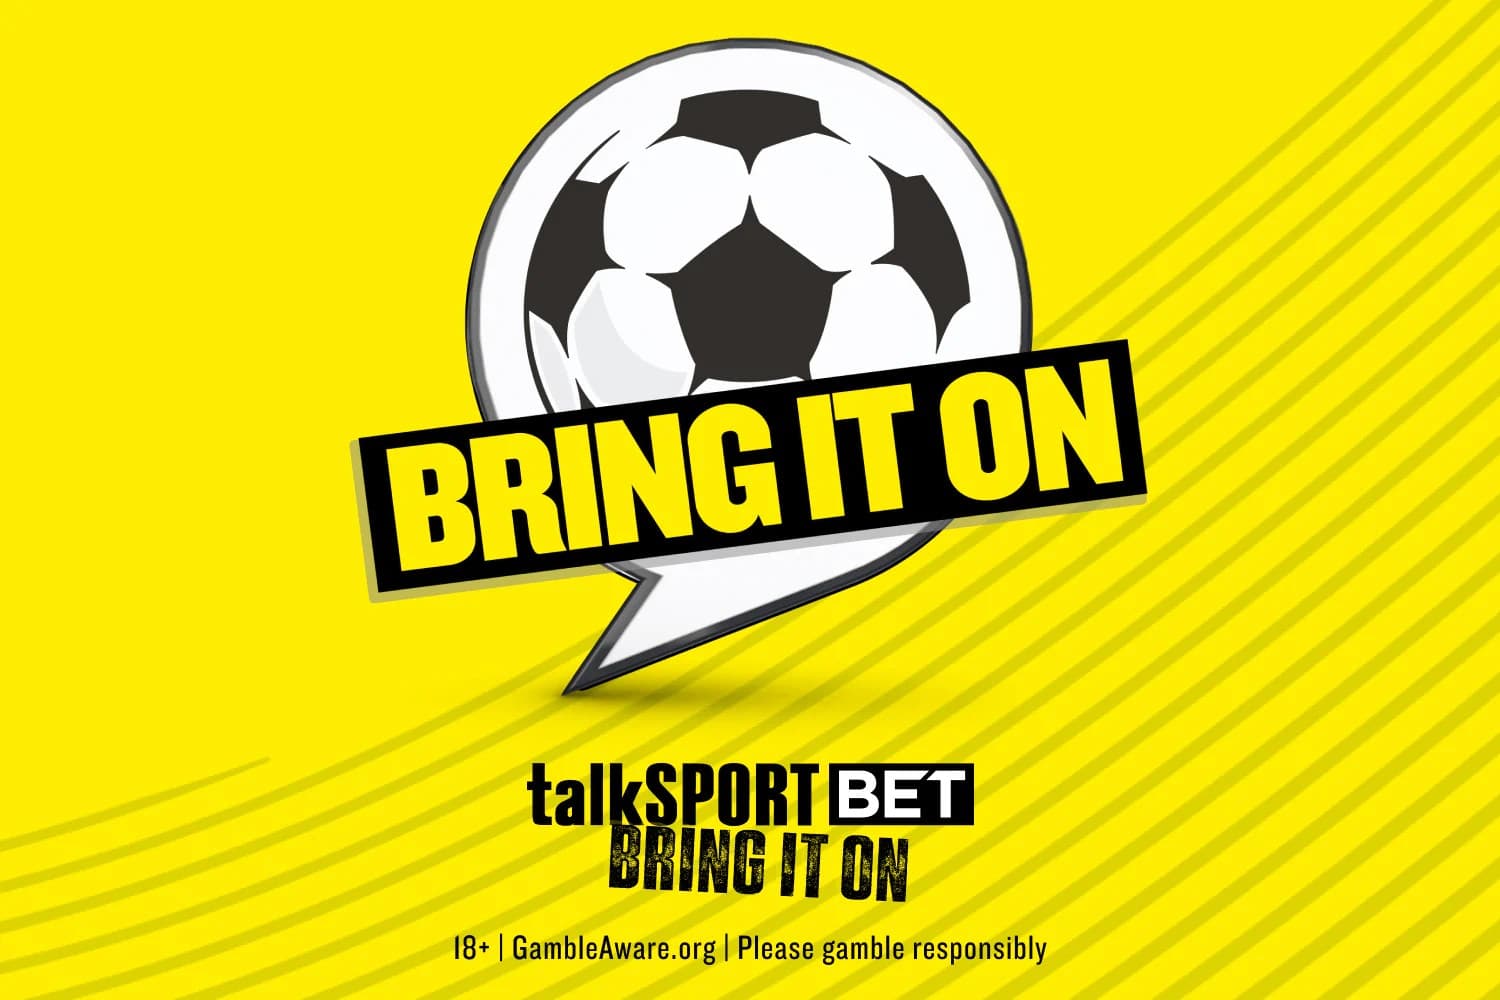 talkSPORT Betting Tips – Best Football Bets and Expert Tips for Saturday May 4